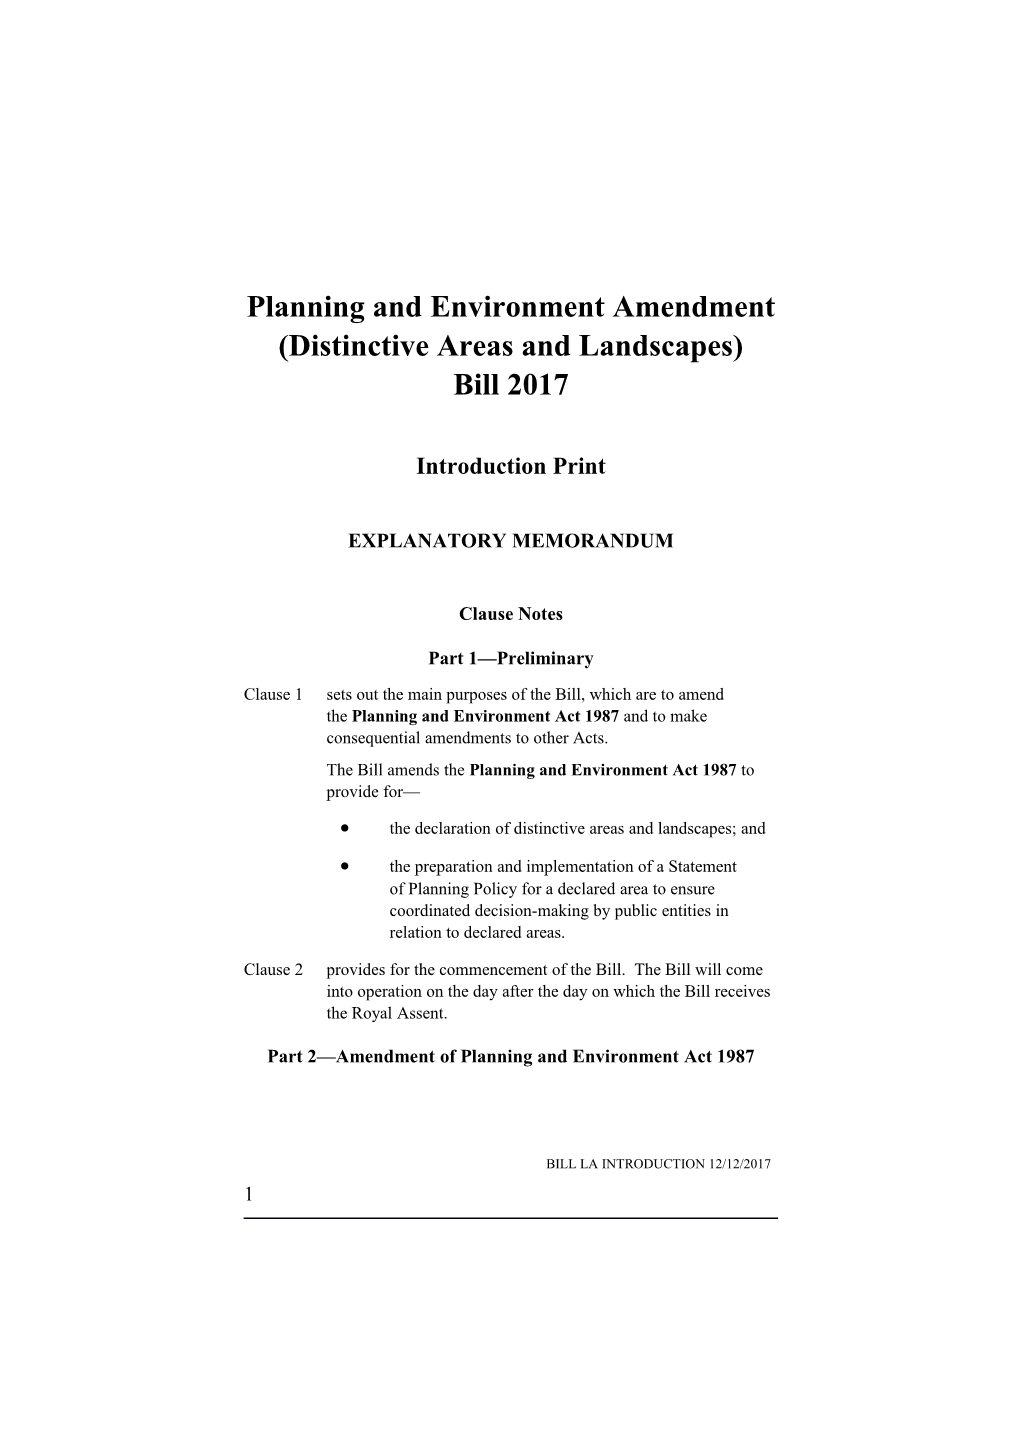 Planning and Environment Amendment (Distinctive Areas and Landscapes) Bill 2017